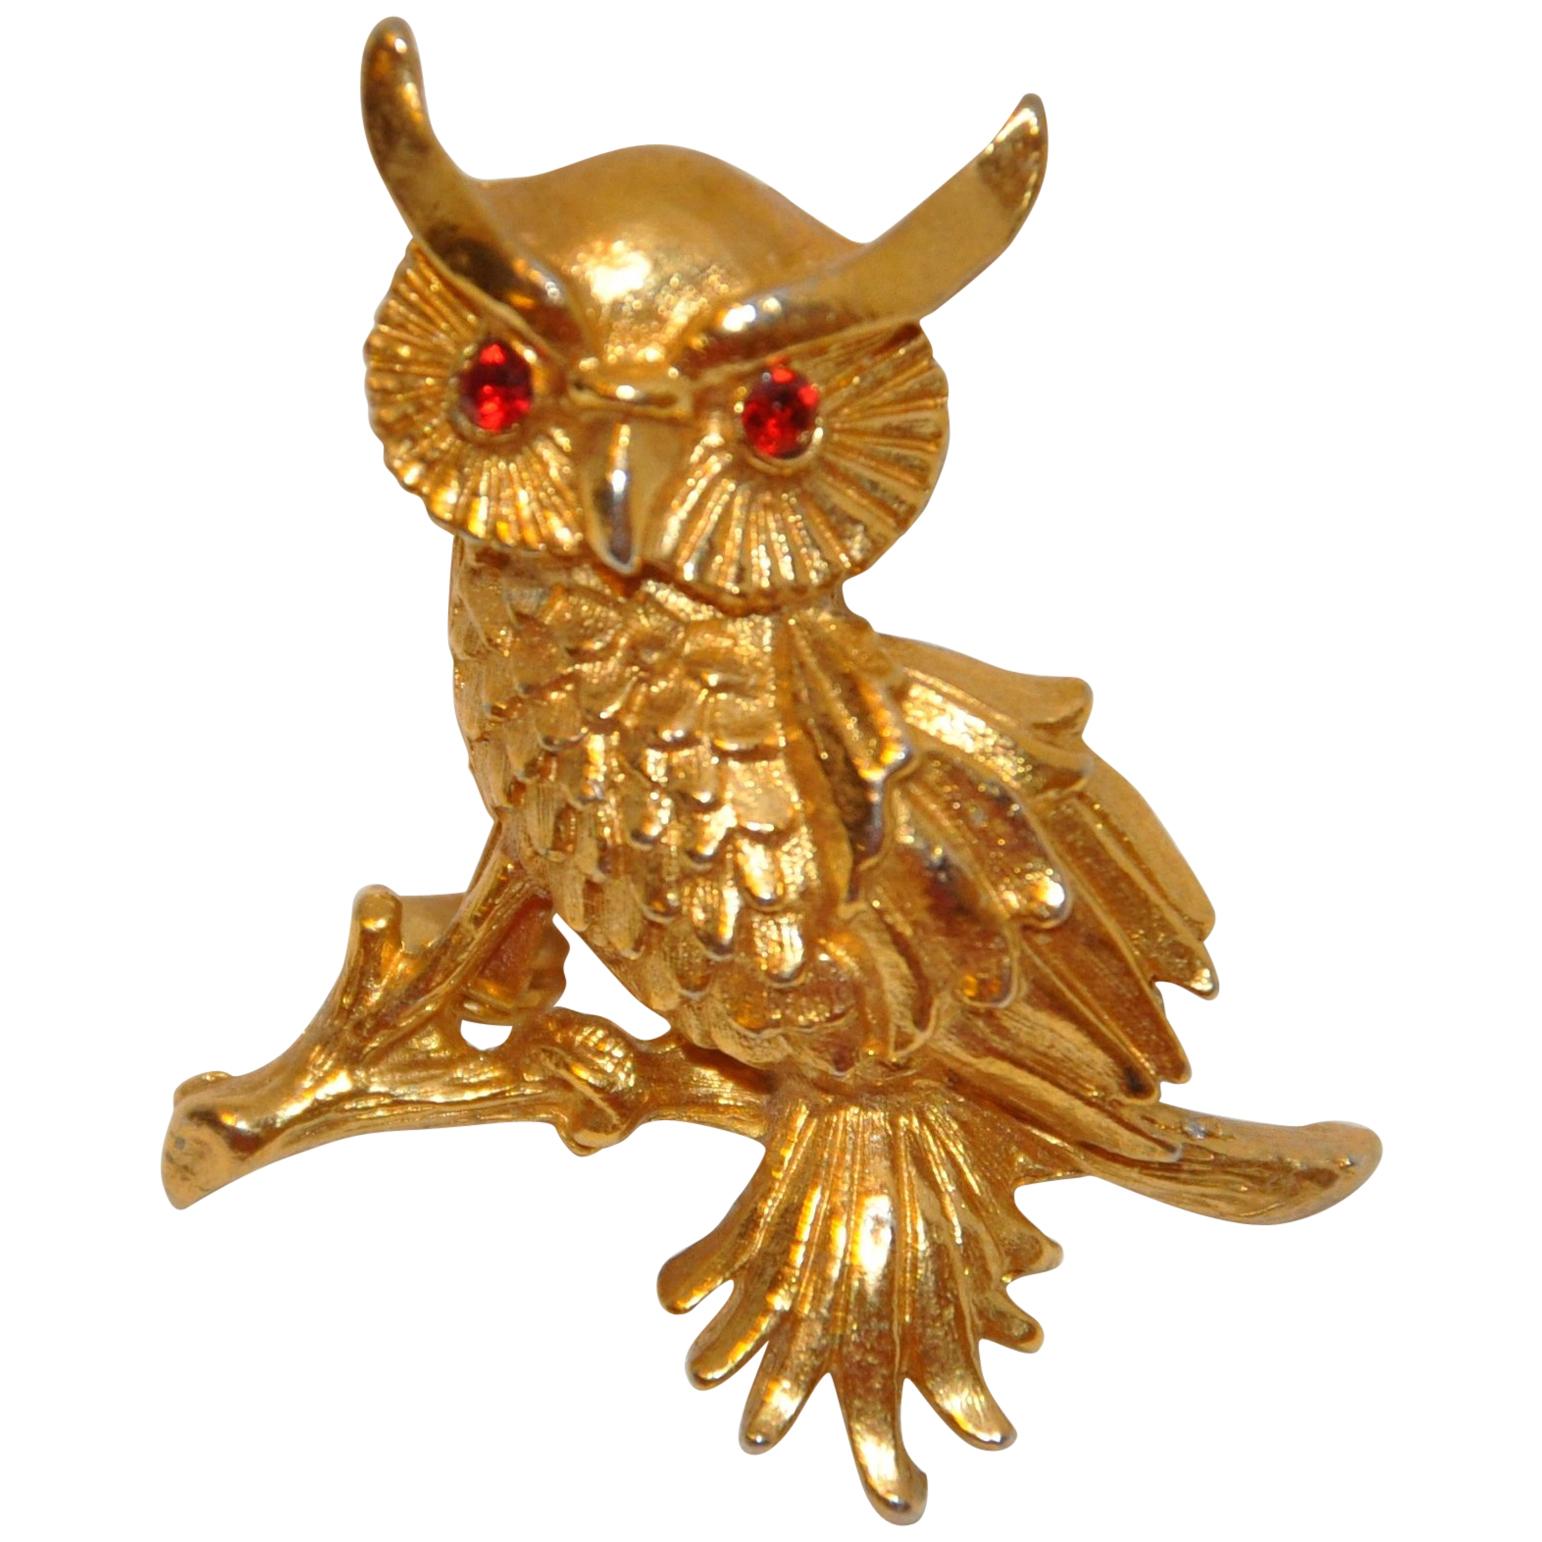 Gilded Gold Vermeil Hardware "Owl" Brooch with Ruby-Like Eyes